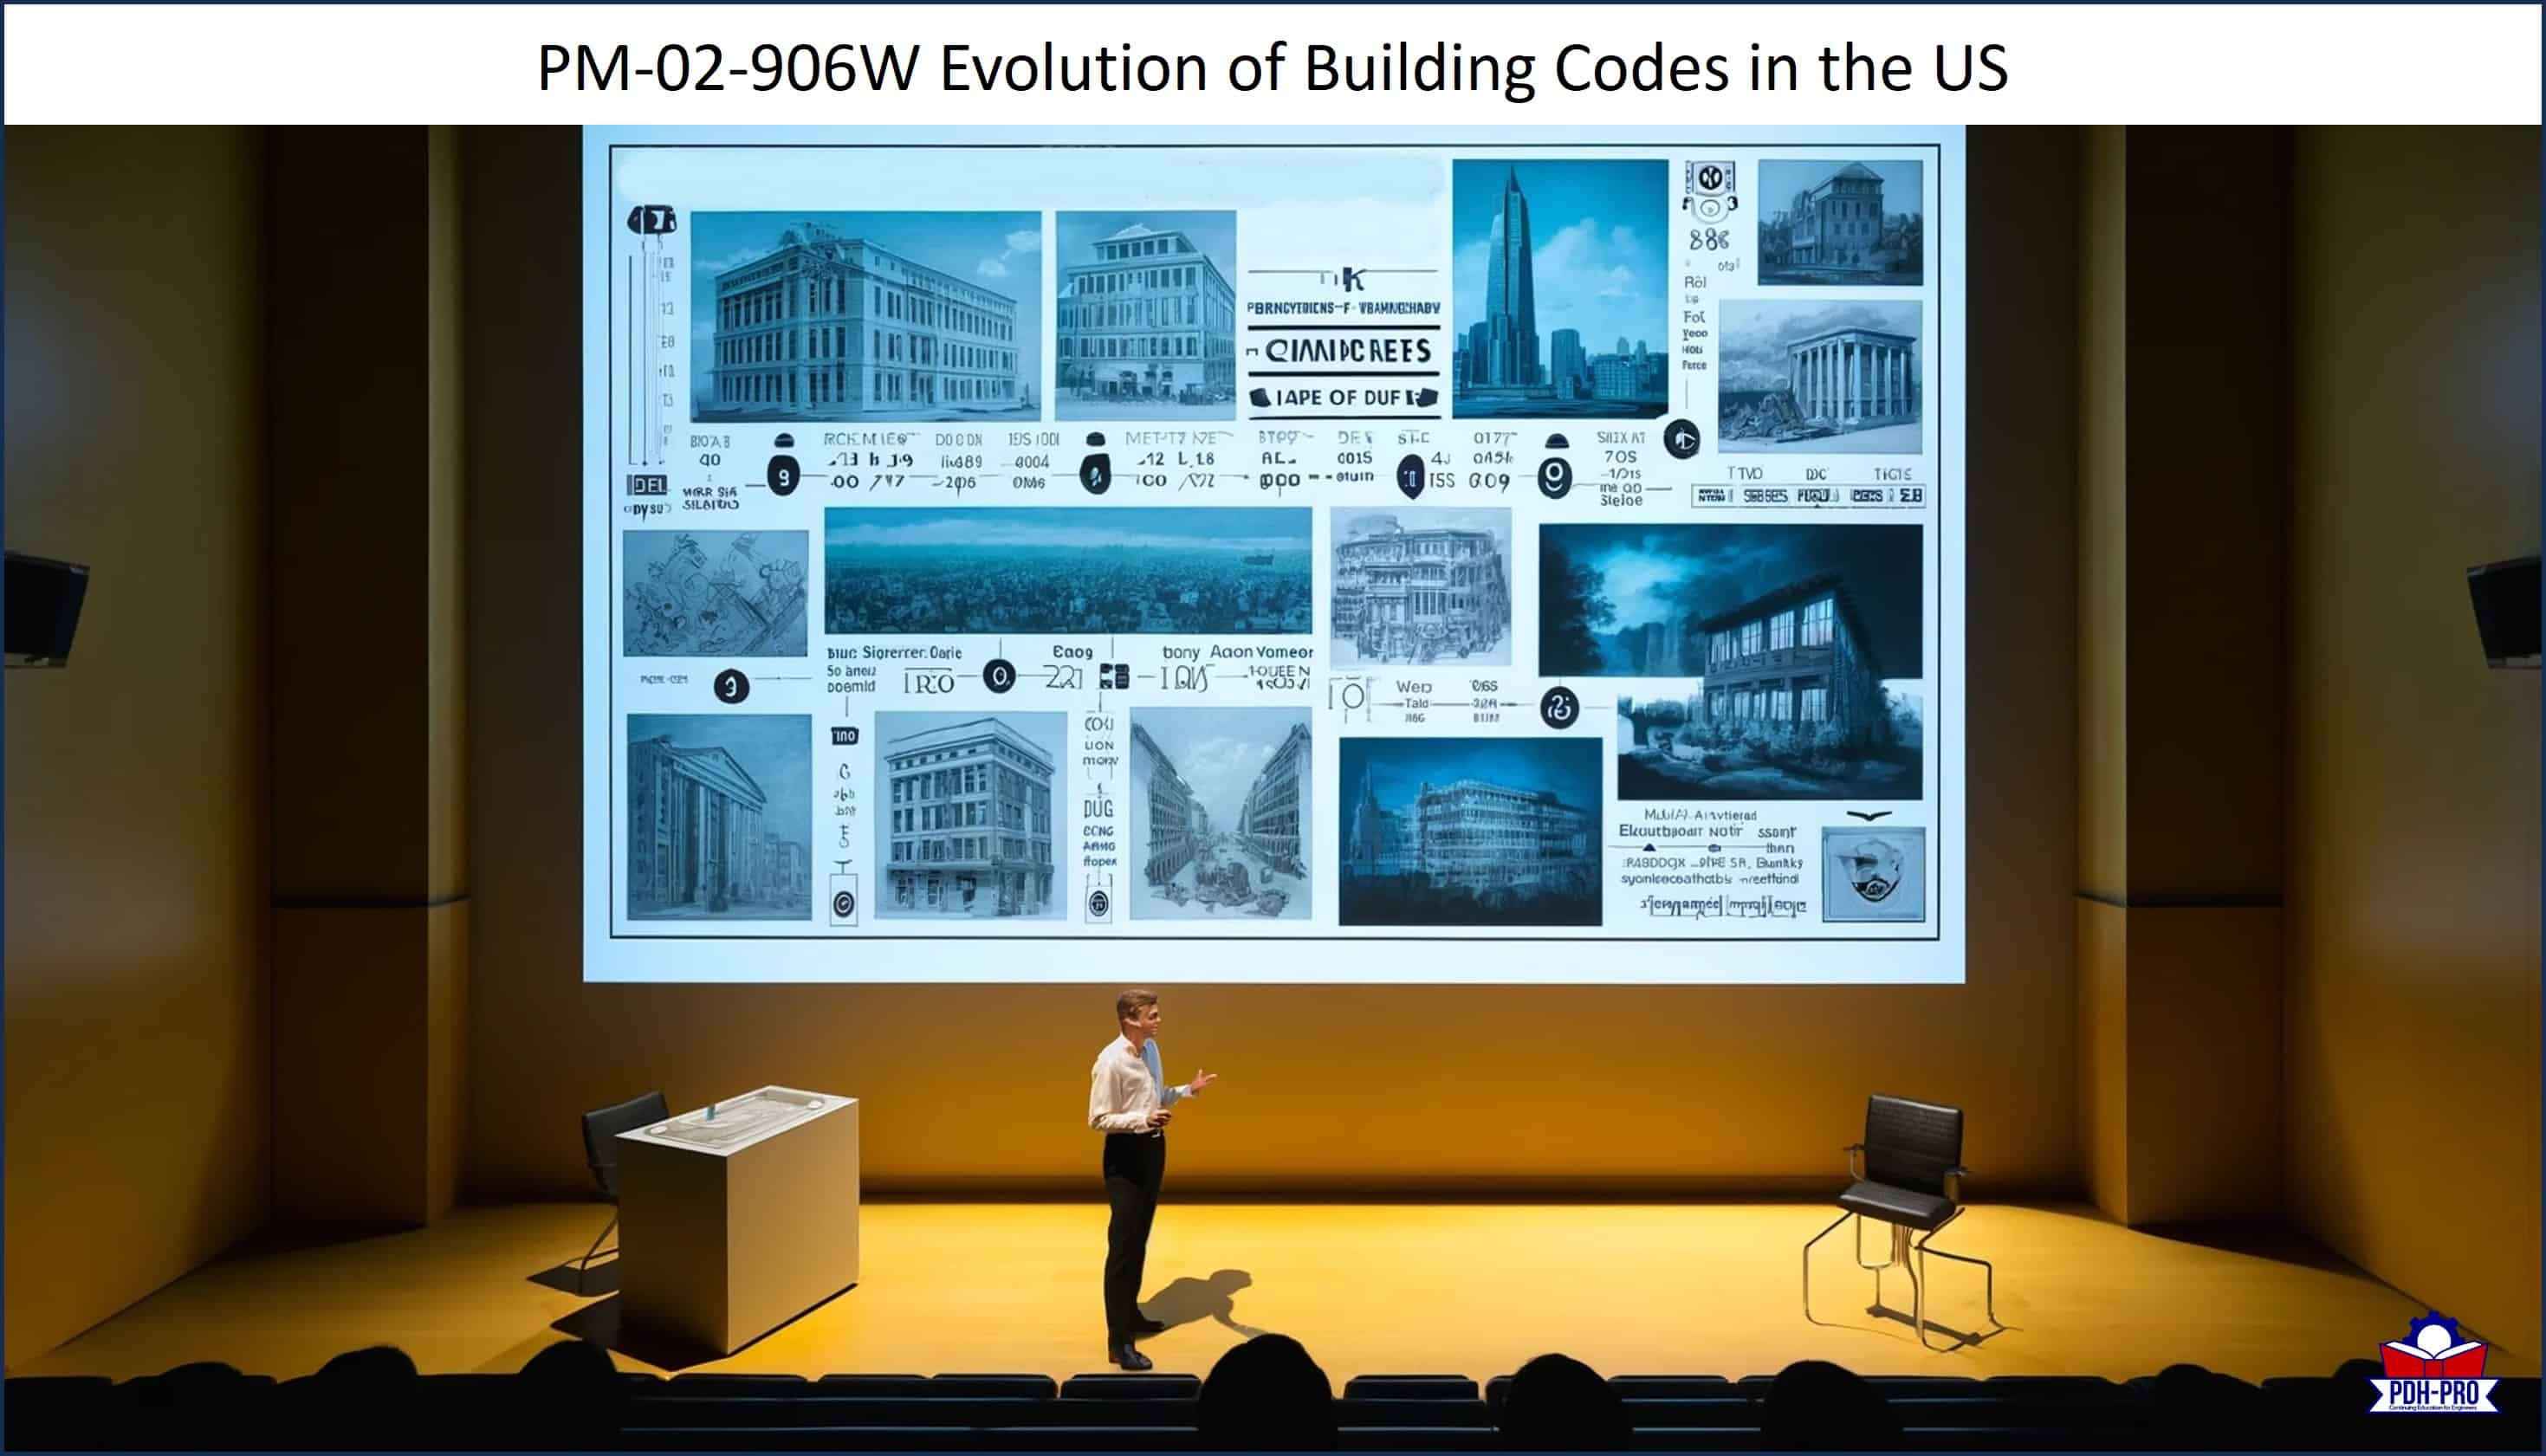 Evolution of Building Codes in the US